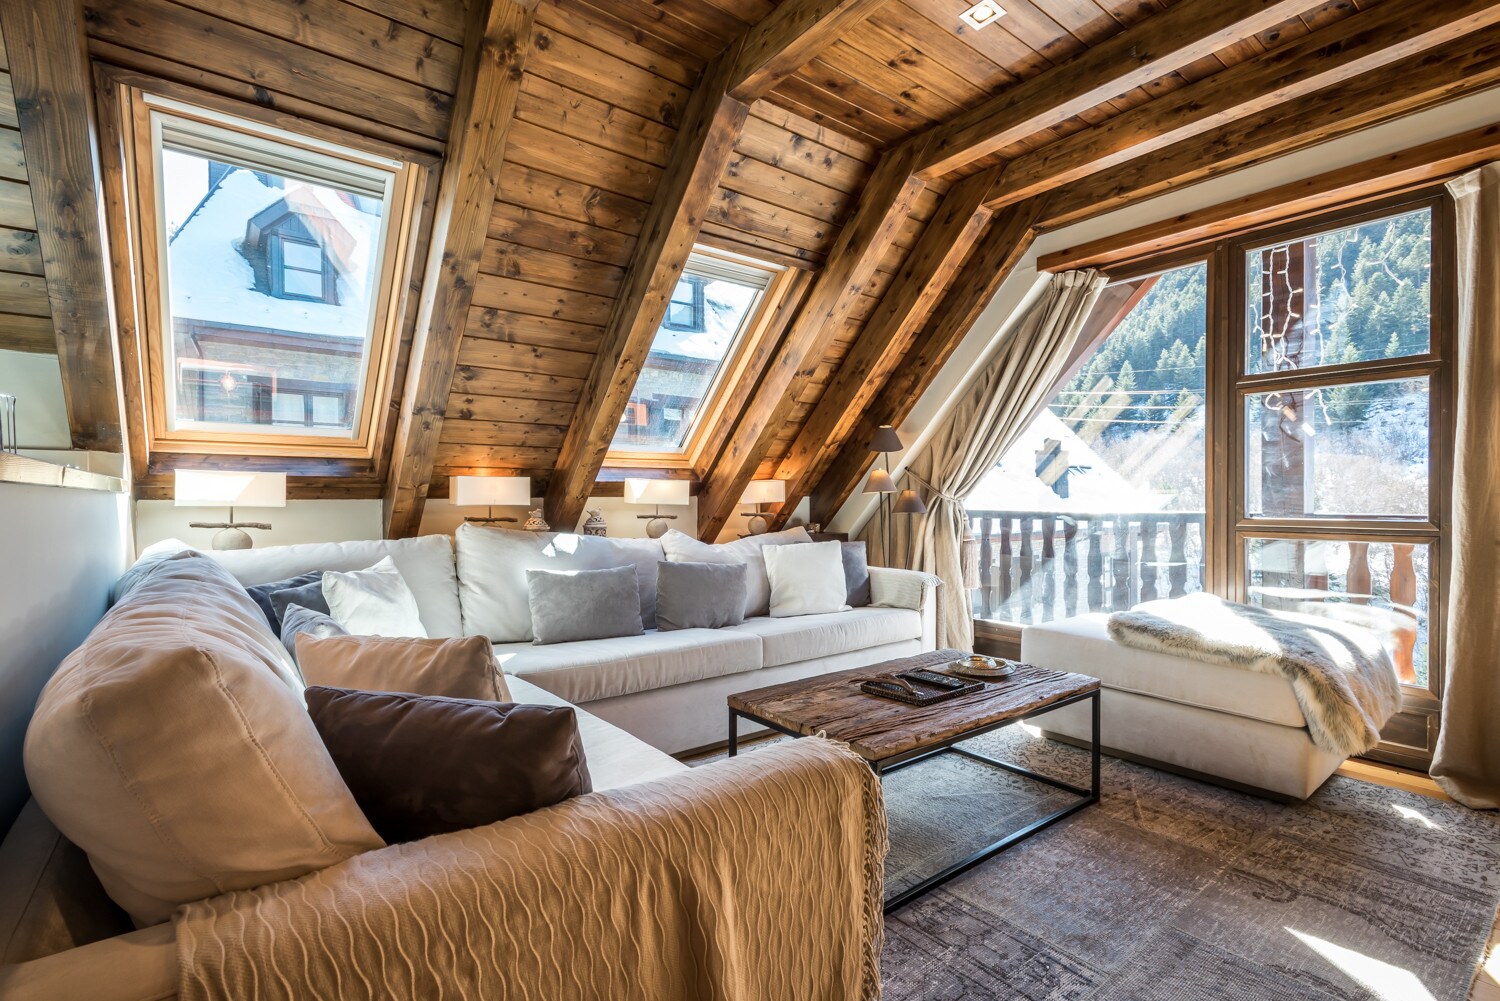 Marmotes by Totiaran is composed of a living room with kitchenette, 4 bedrooms and 3 bathrooms, in the urbanization of Val de Ruda, Baqueira, at the foot of the slopes.